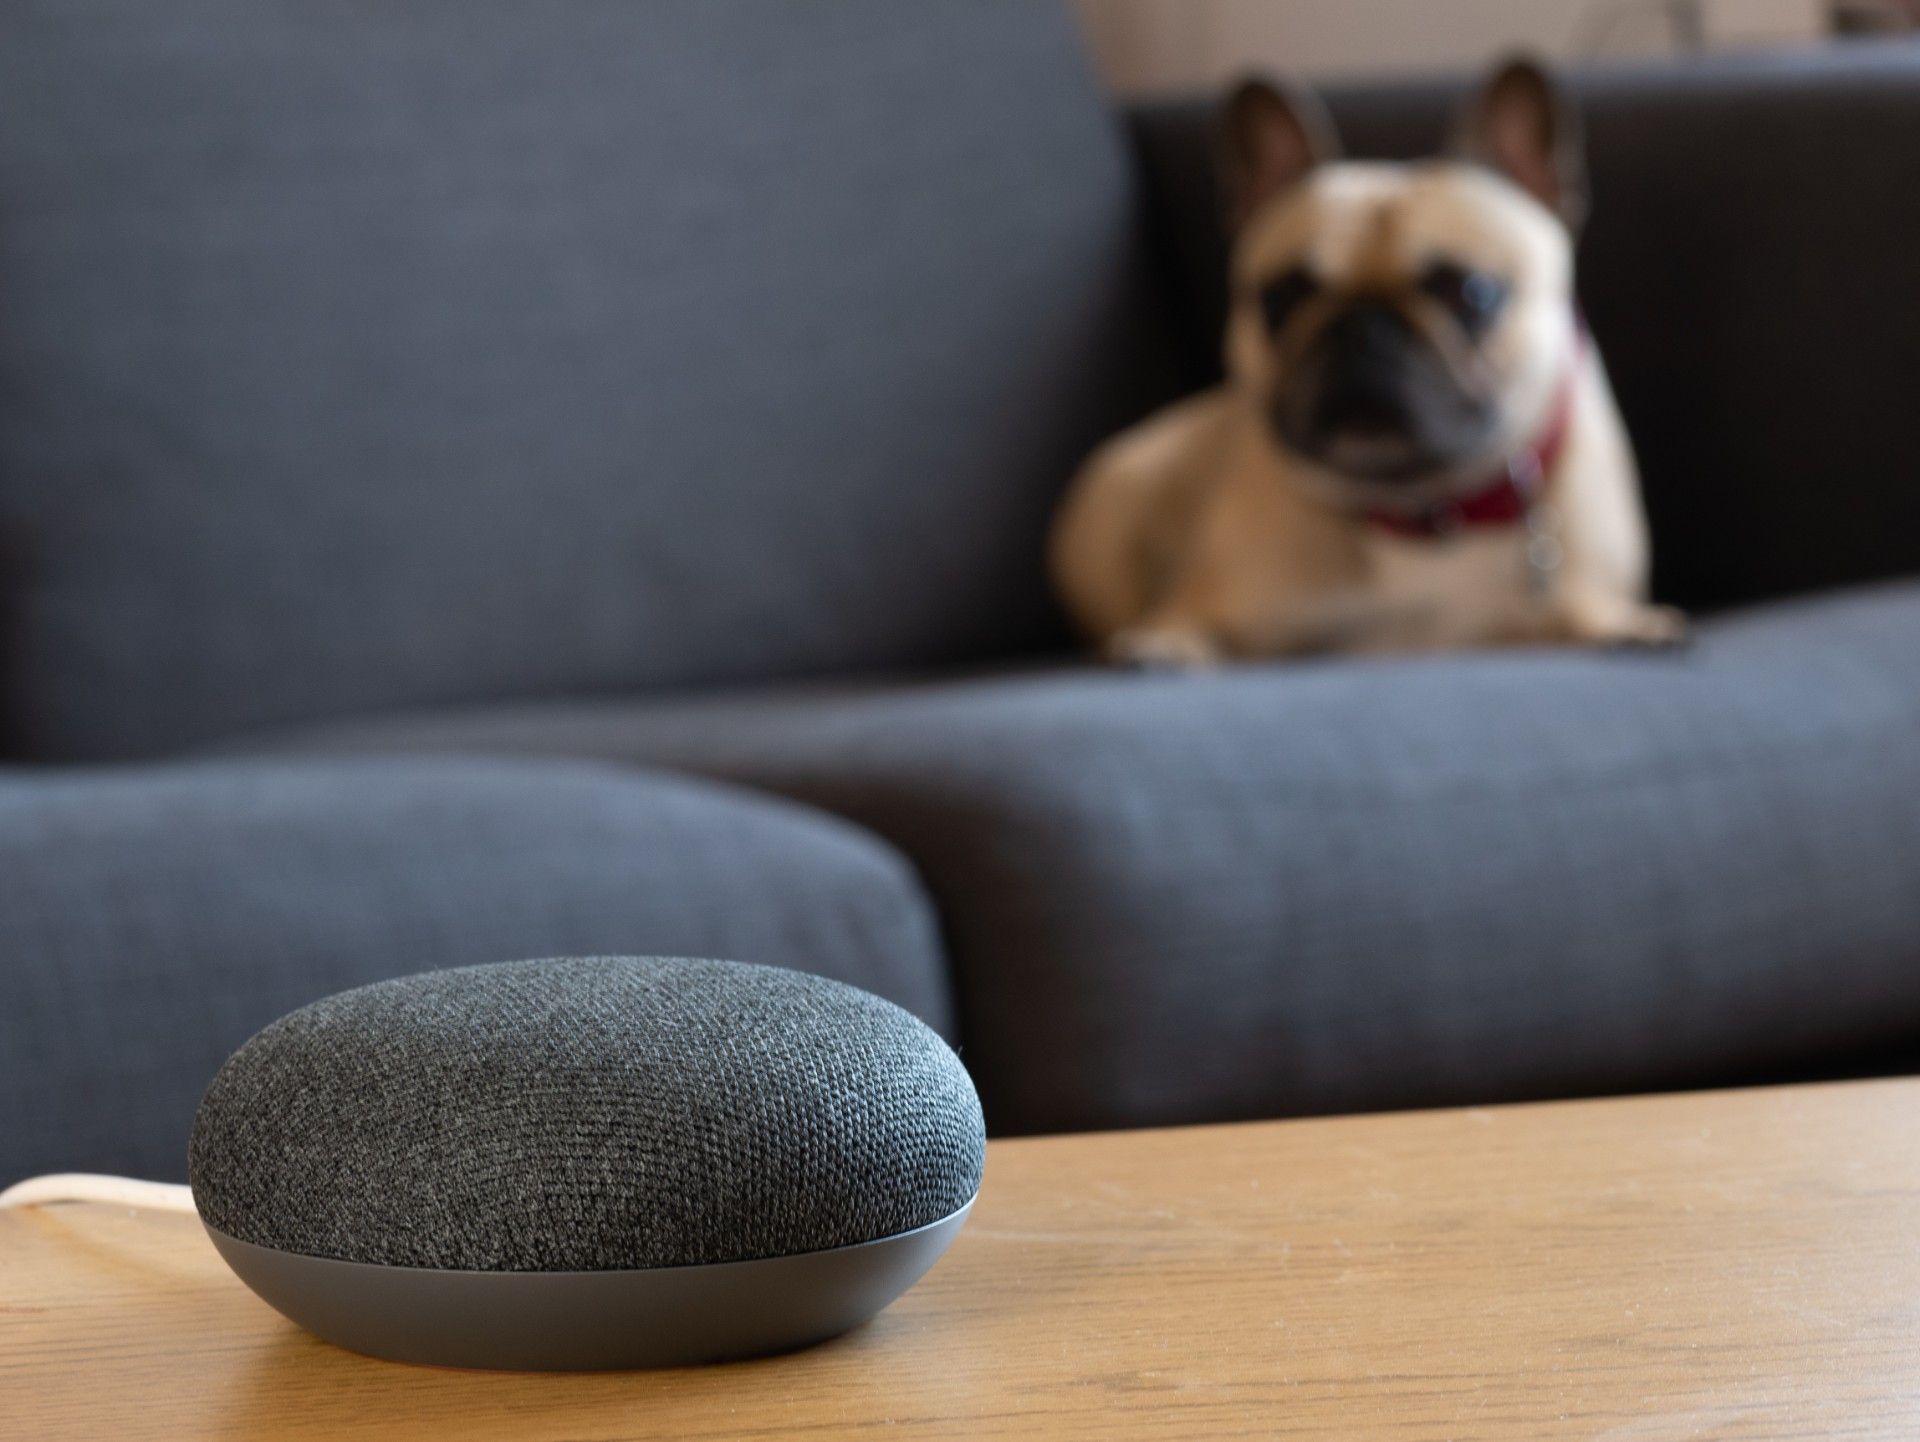 A Google Home Mini smart speaker sits on a table in the foreground, with a dog on a sofa blurred in the background - Google Home devices